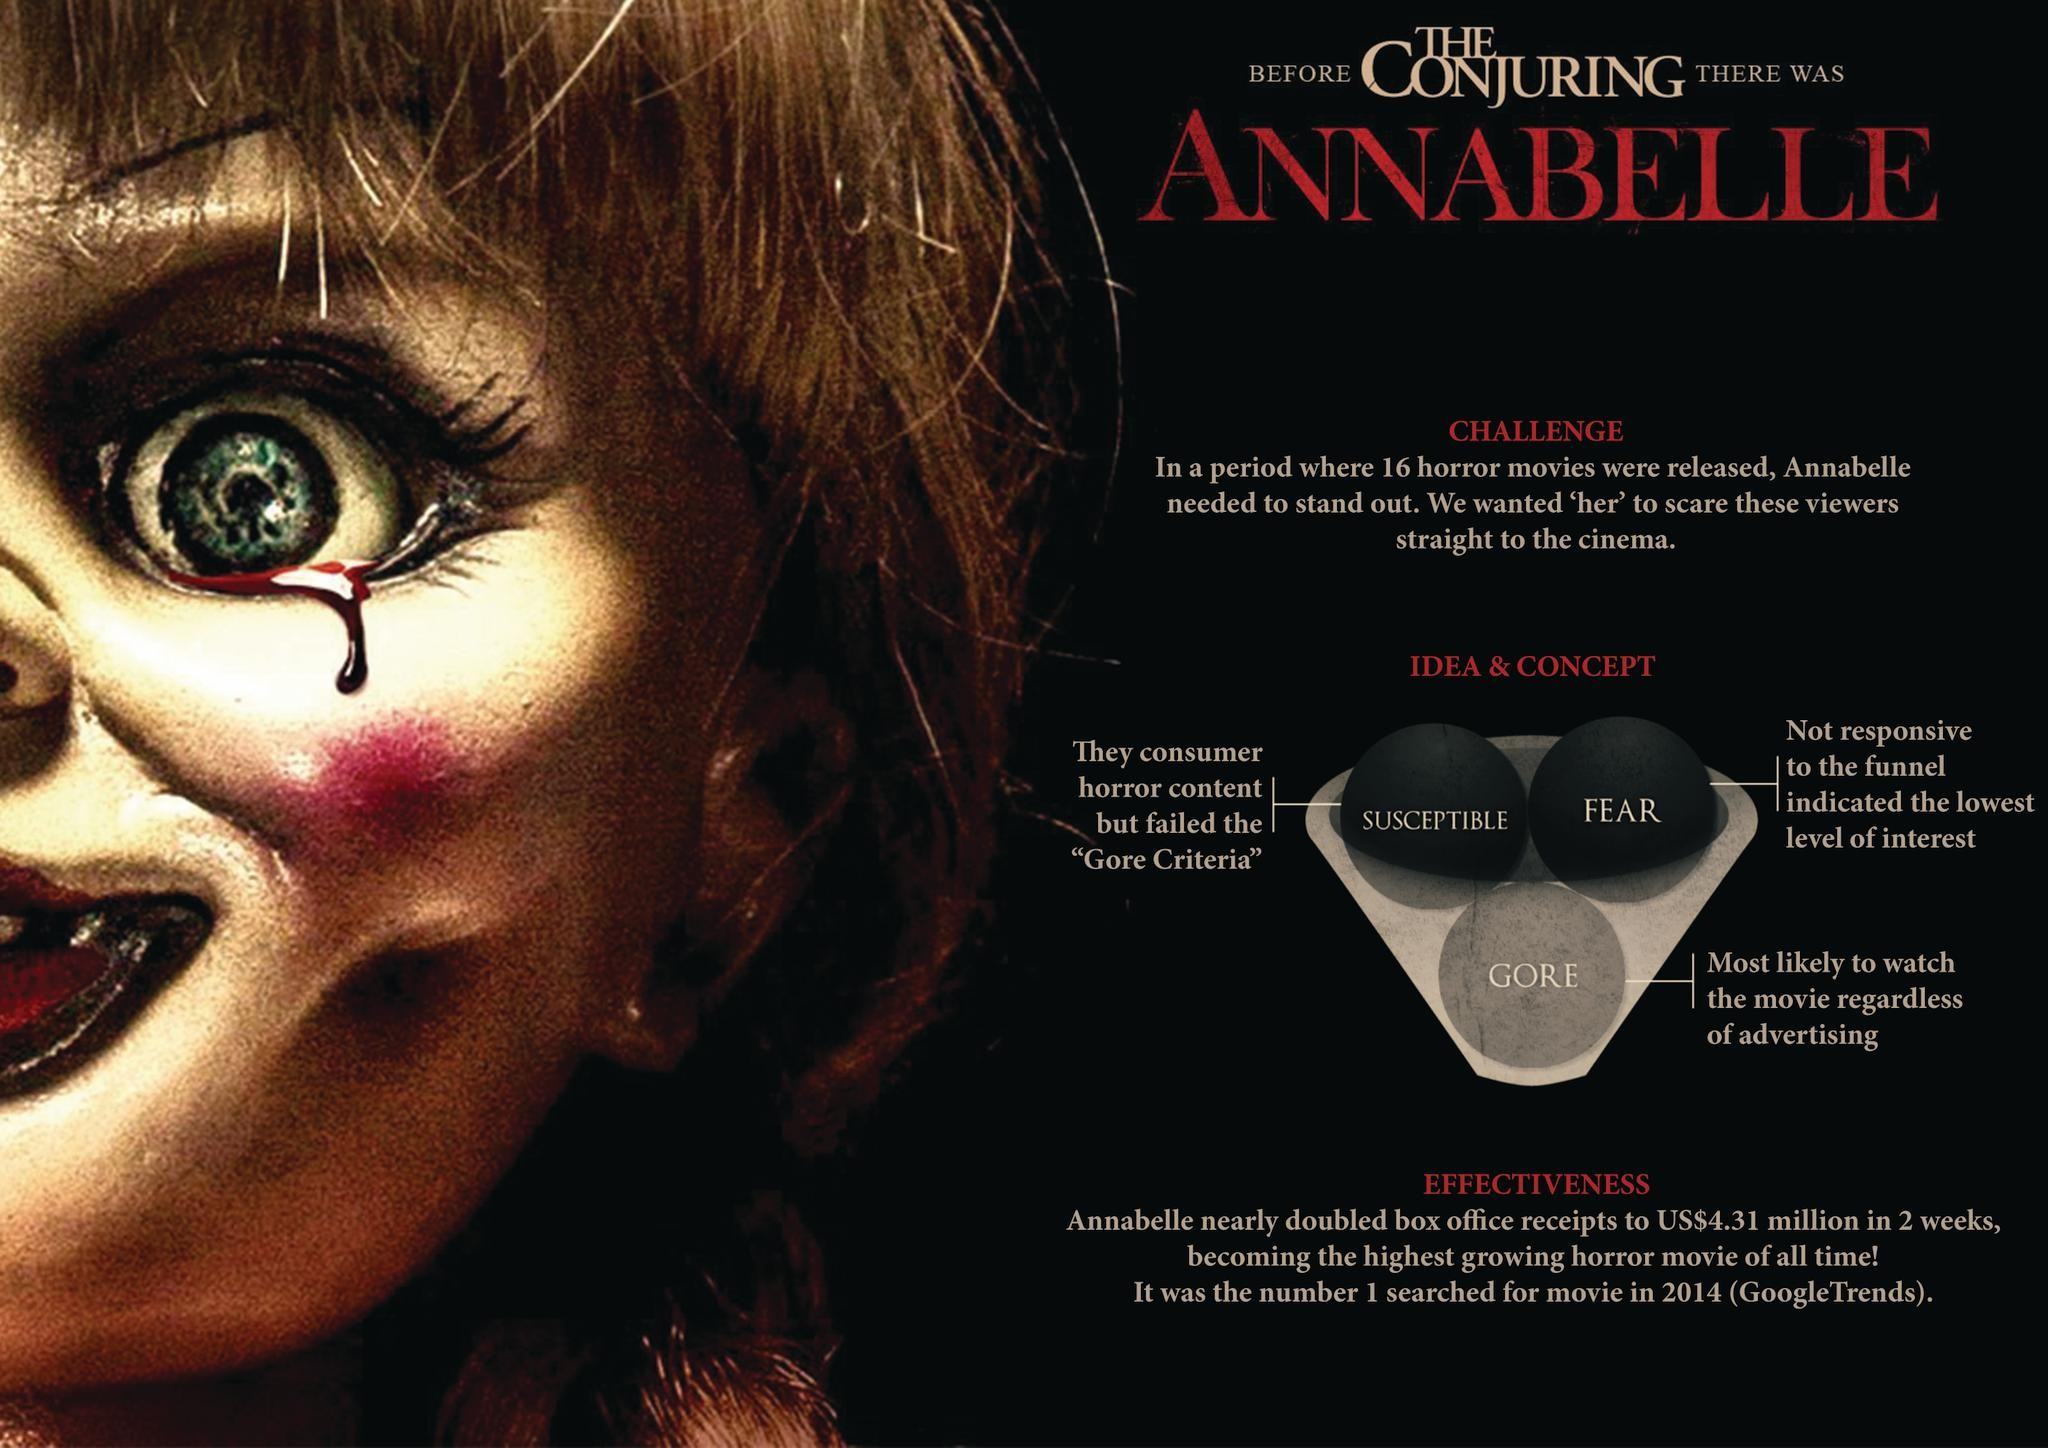 THE SECRET TO BLOCKBUSTER HORROR MOVIES? AGENCY’S GSF FUNNEL